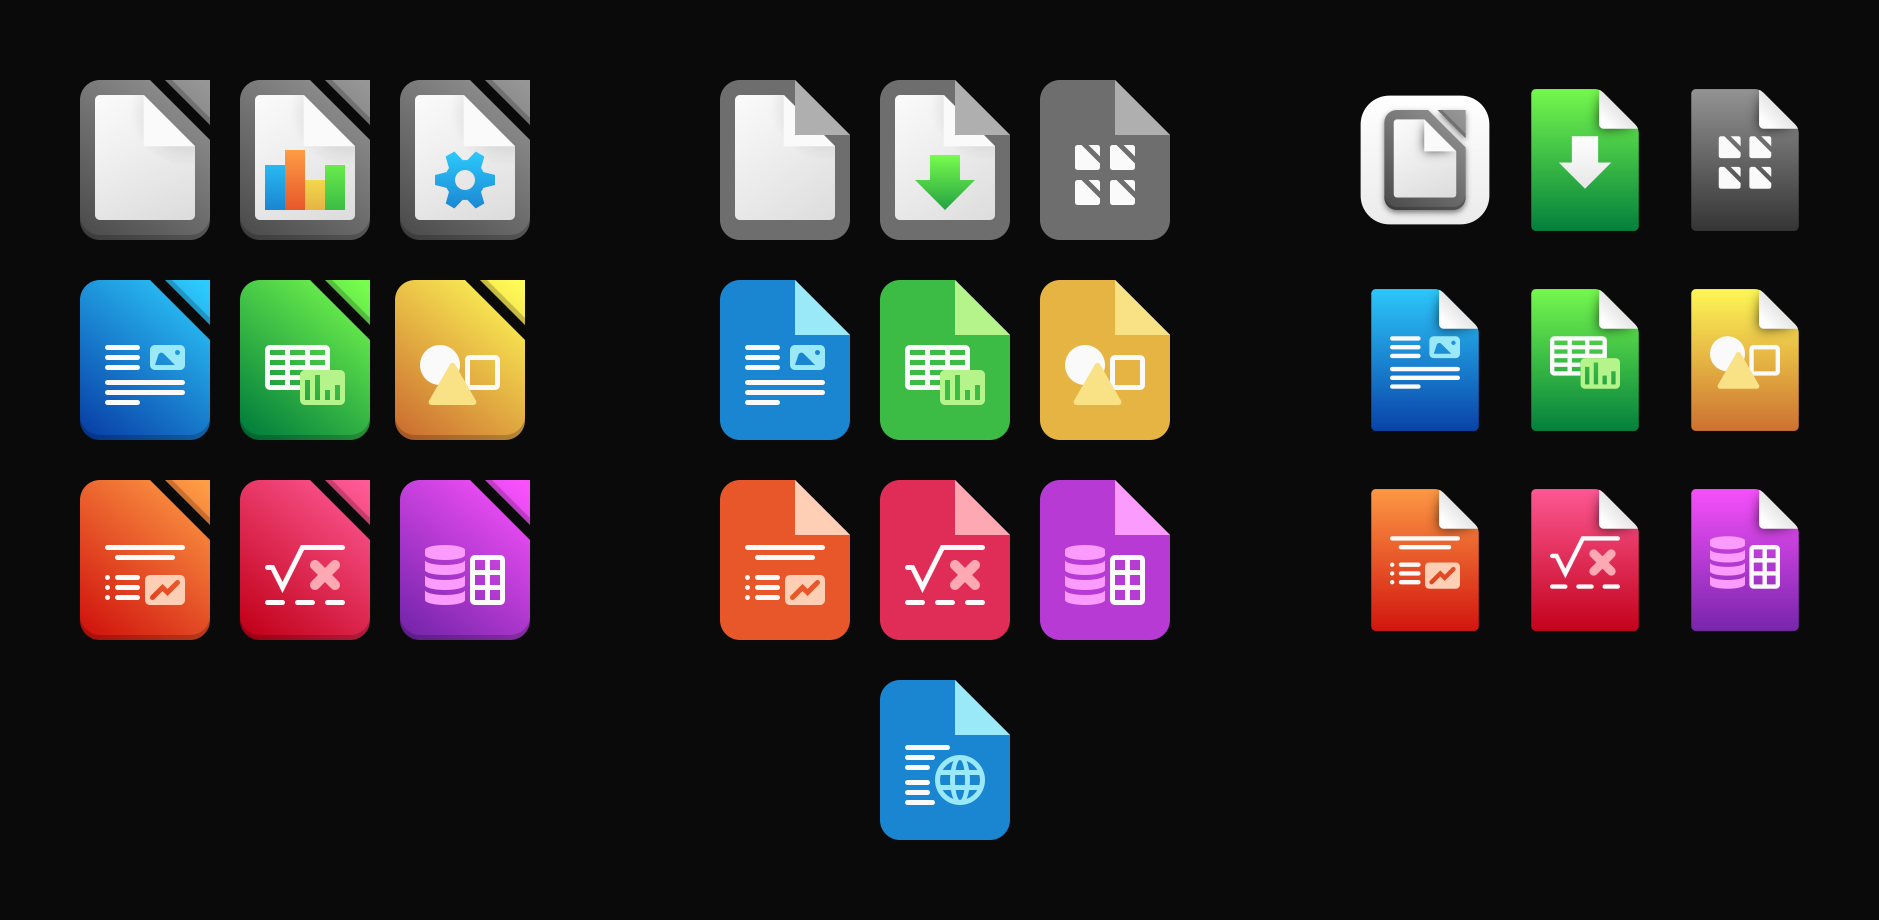 Image of new LibreOffice icons